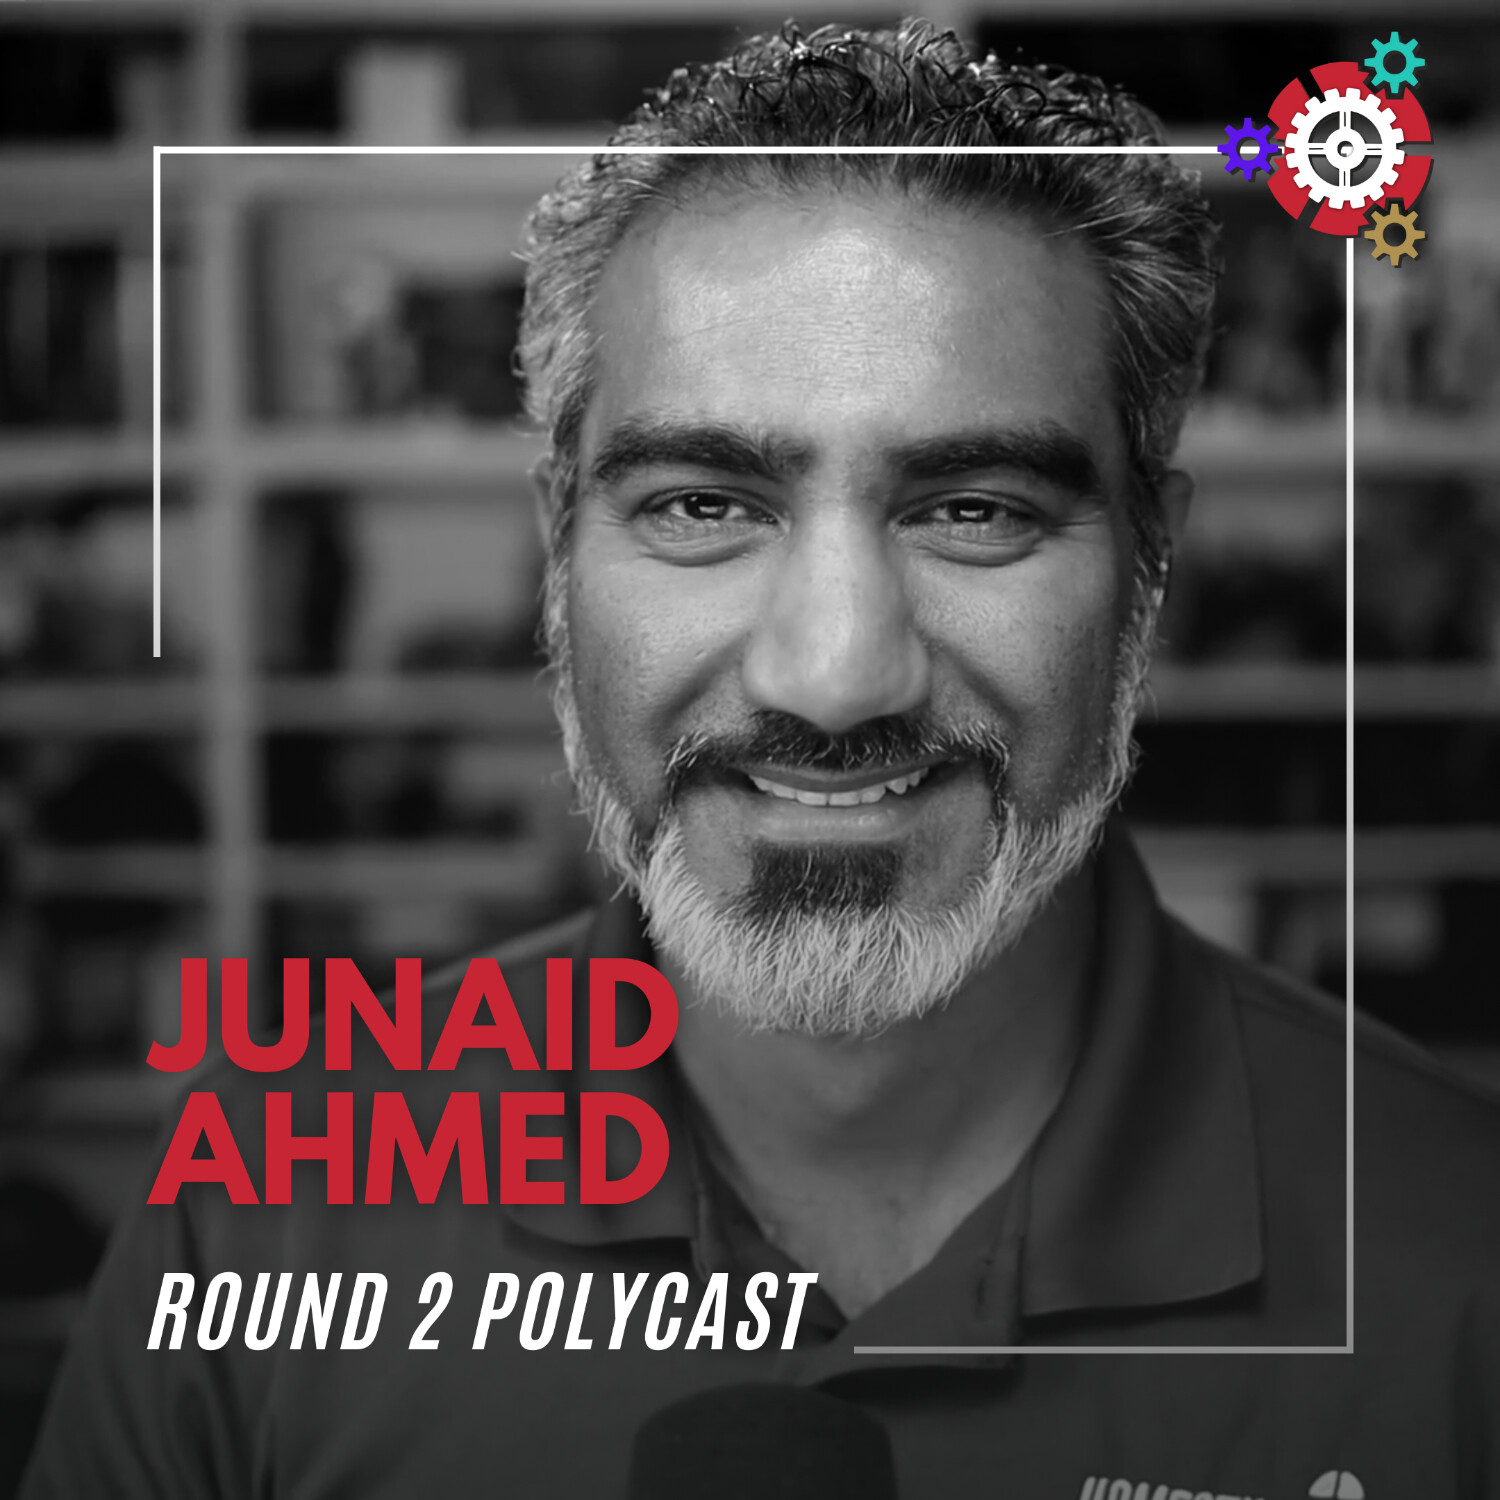 An Insight into SuperJunaid’s Content Journey with Junaid Ahmed #Round2PolyCast